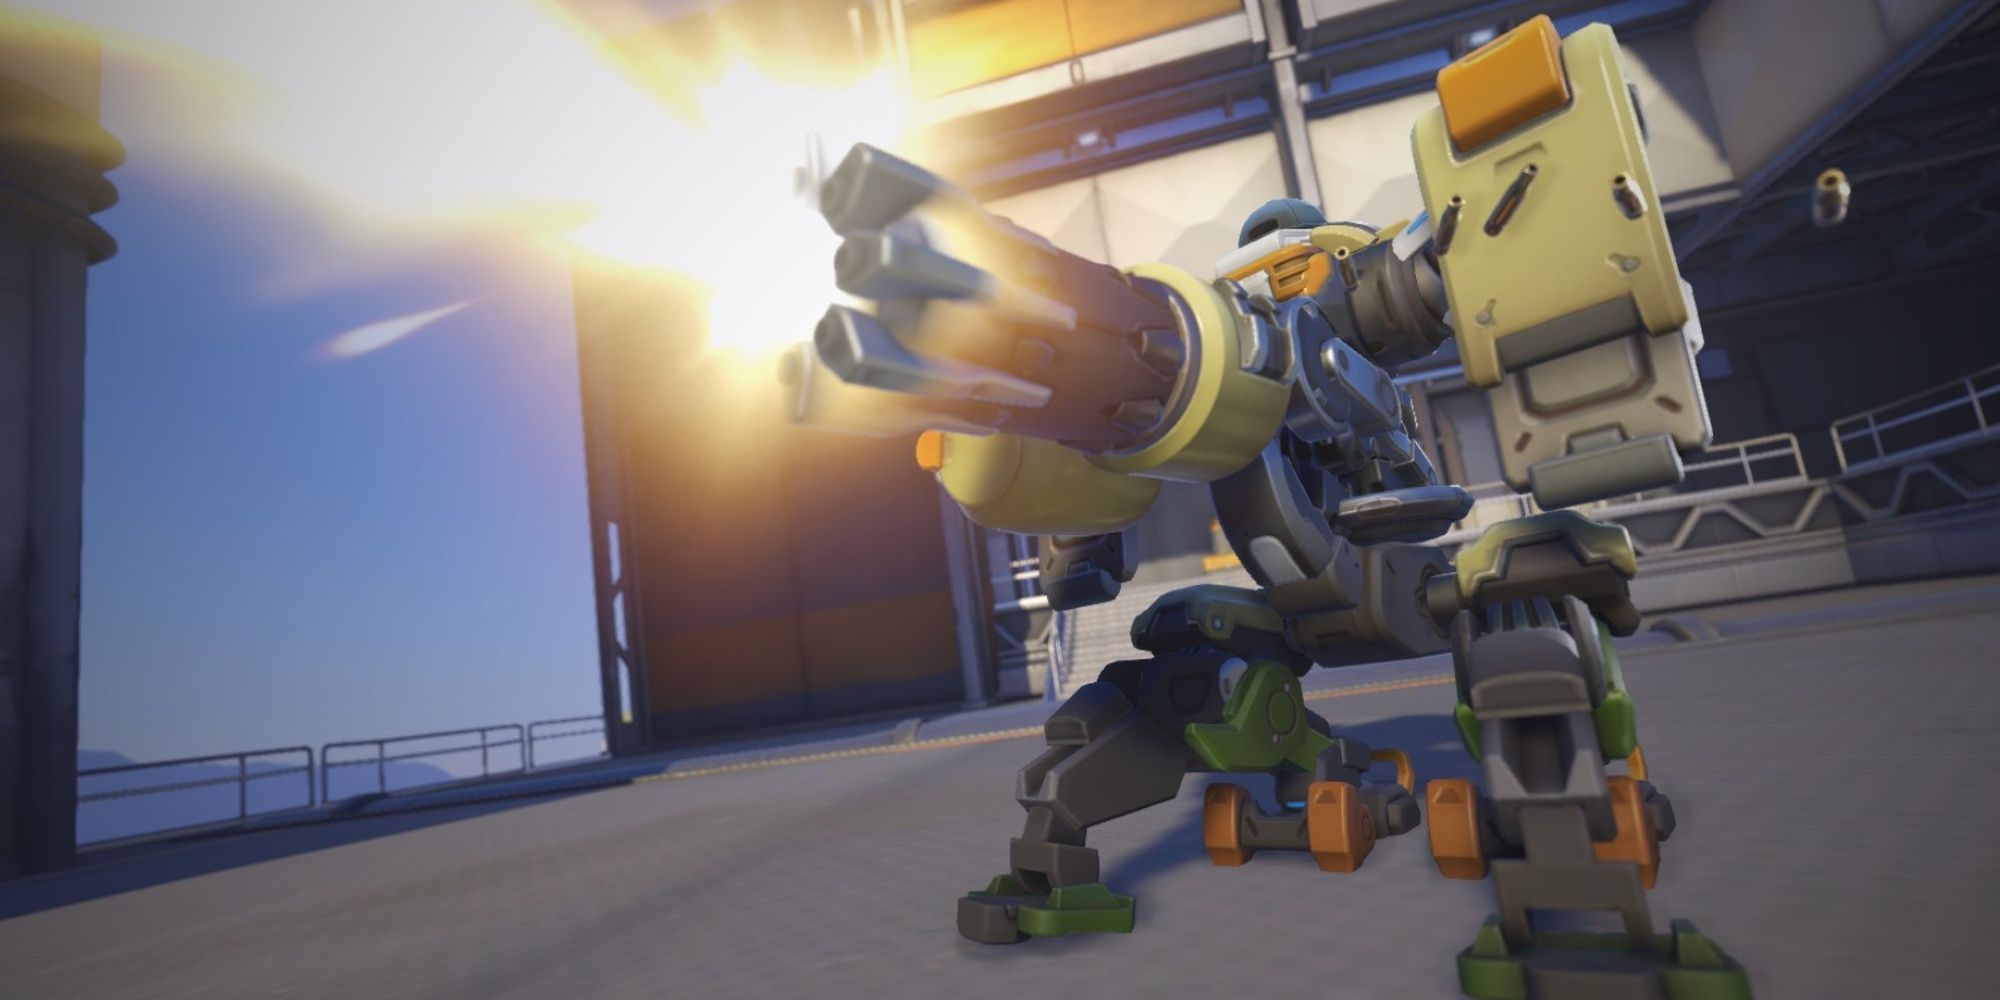 Bastion from Overwatch 2 fires bullets in his turret mode.